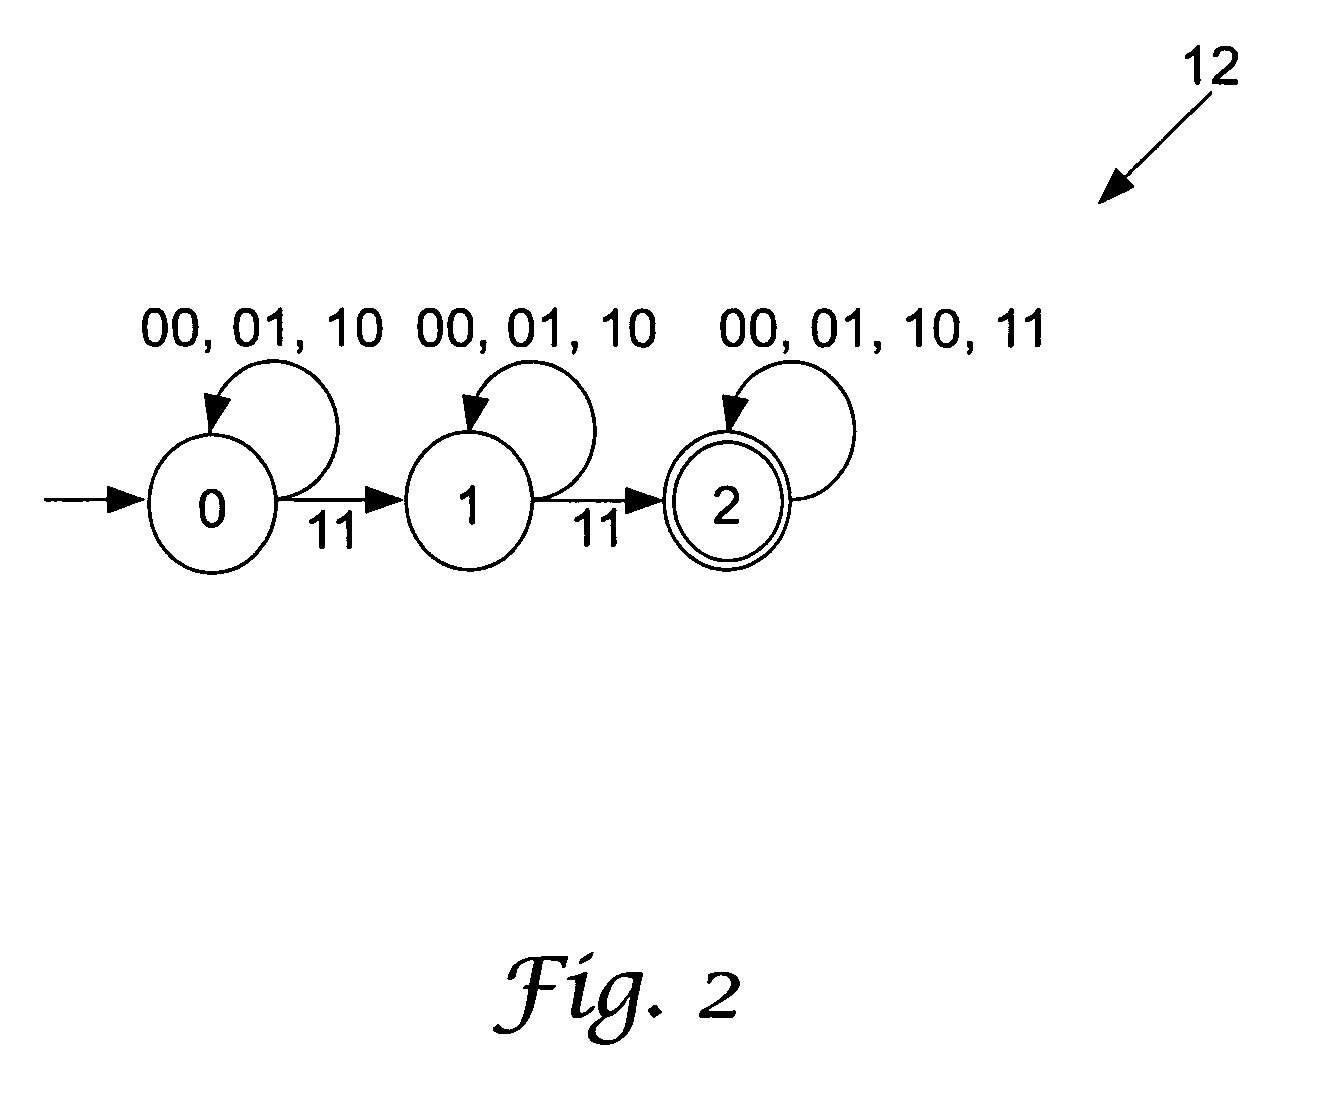 Automata based storage and execution of application logic in smart card like devices